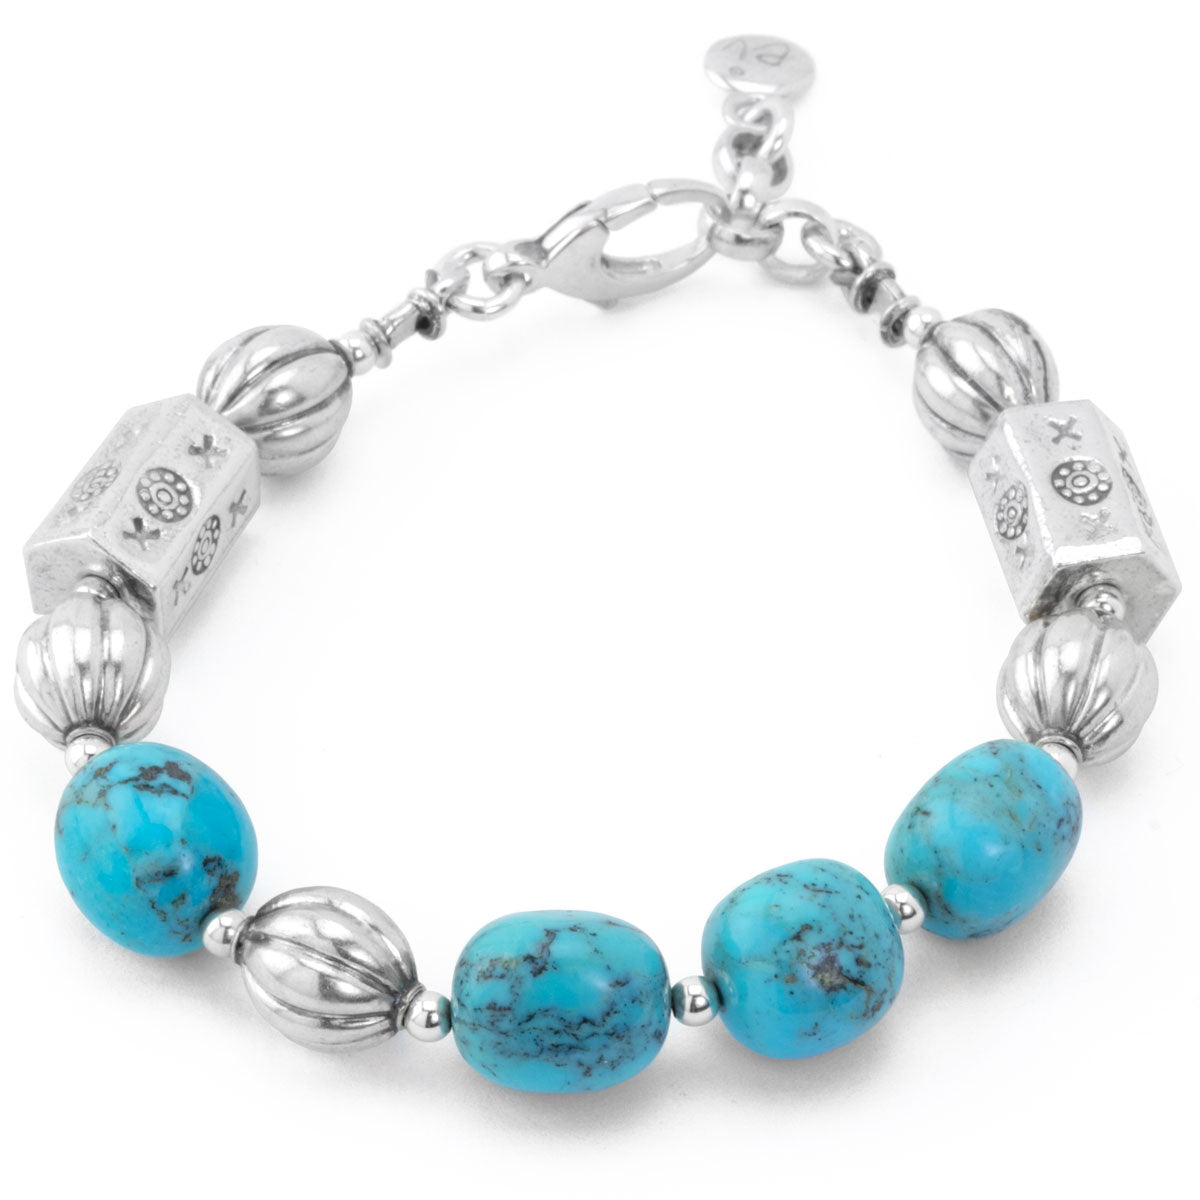 The Goddess Collection Turquoise Nugget Bracelet